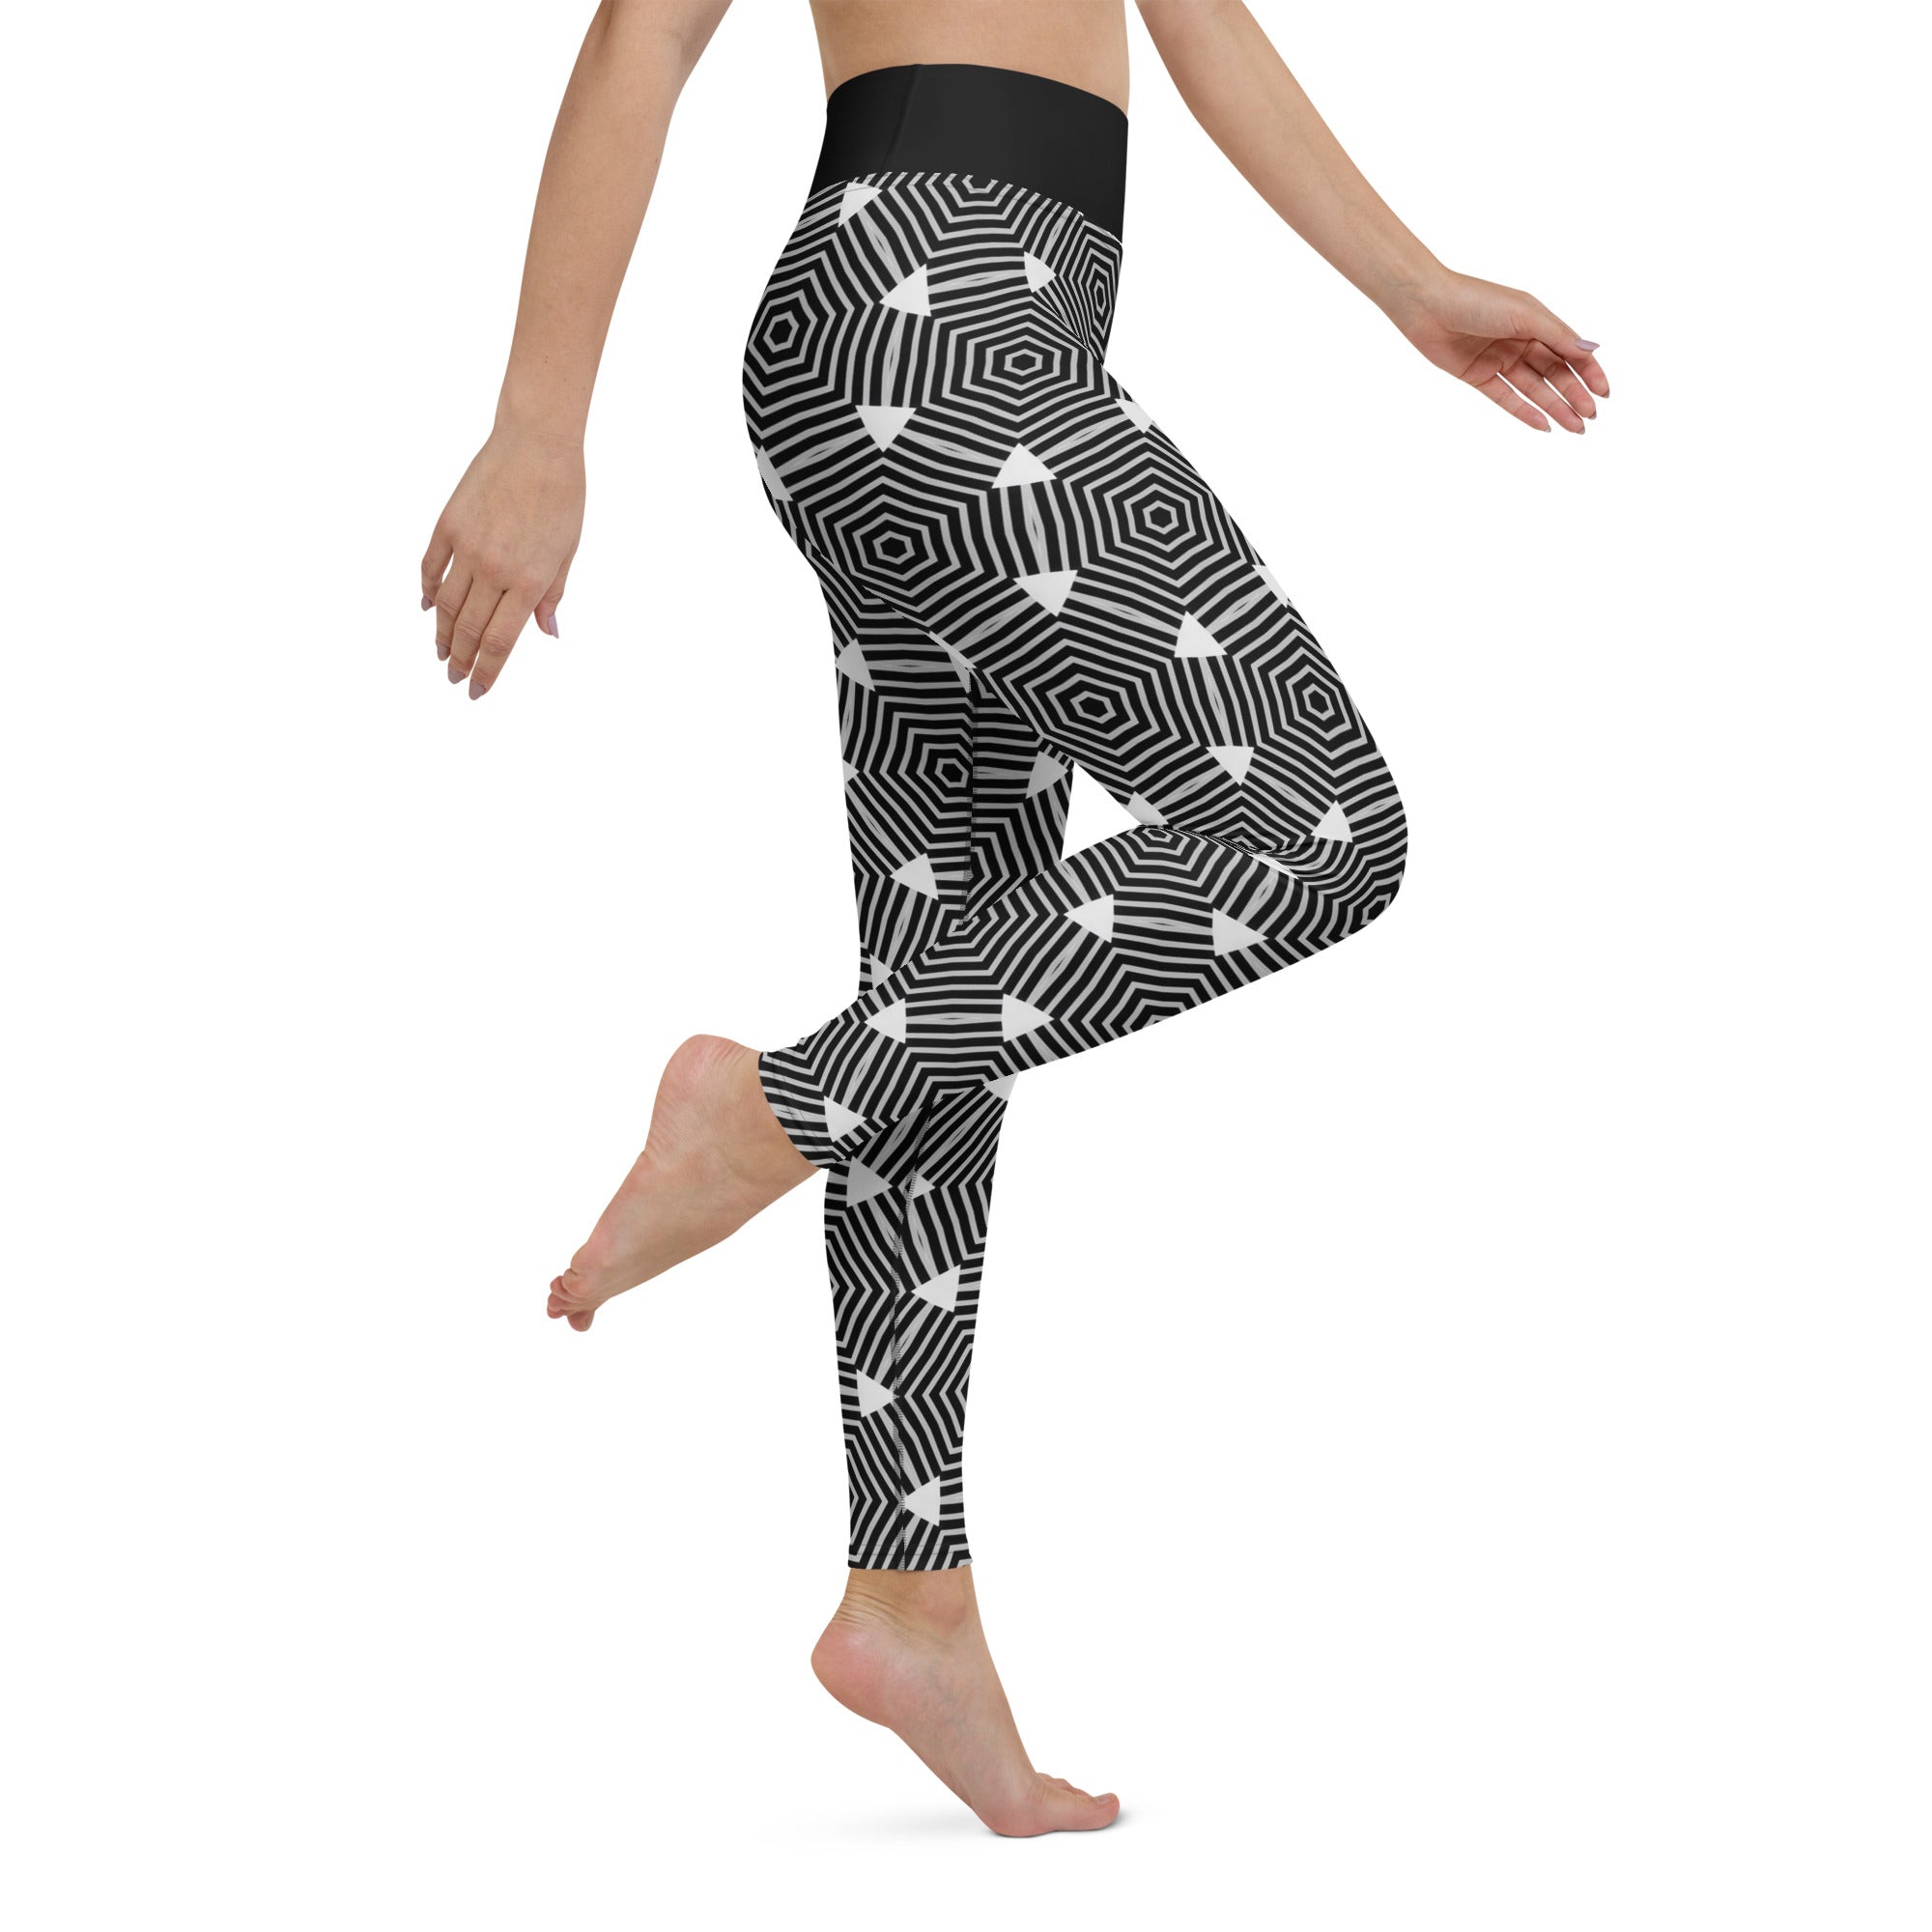 Kaleidoscope patterned yoga leggings featuring a unique, eye-catching design.